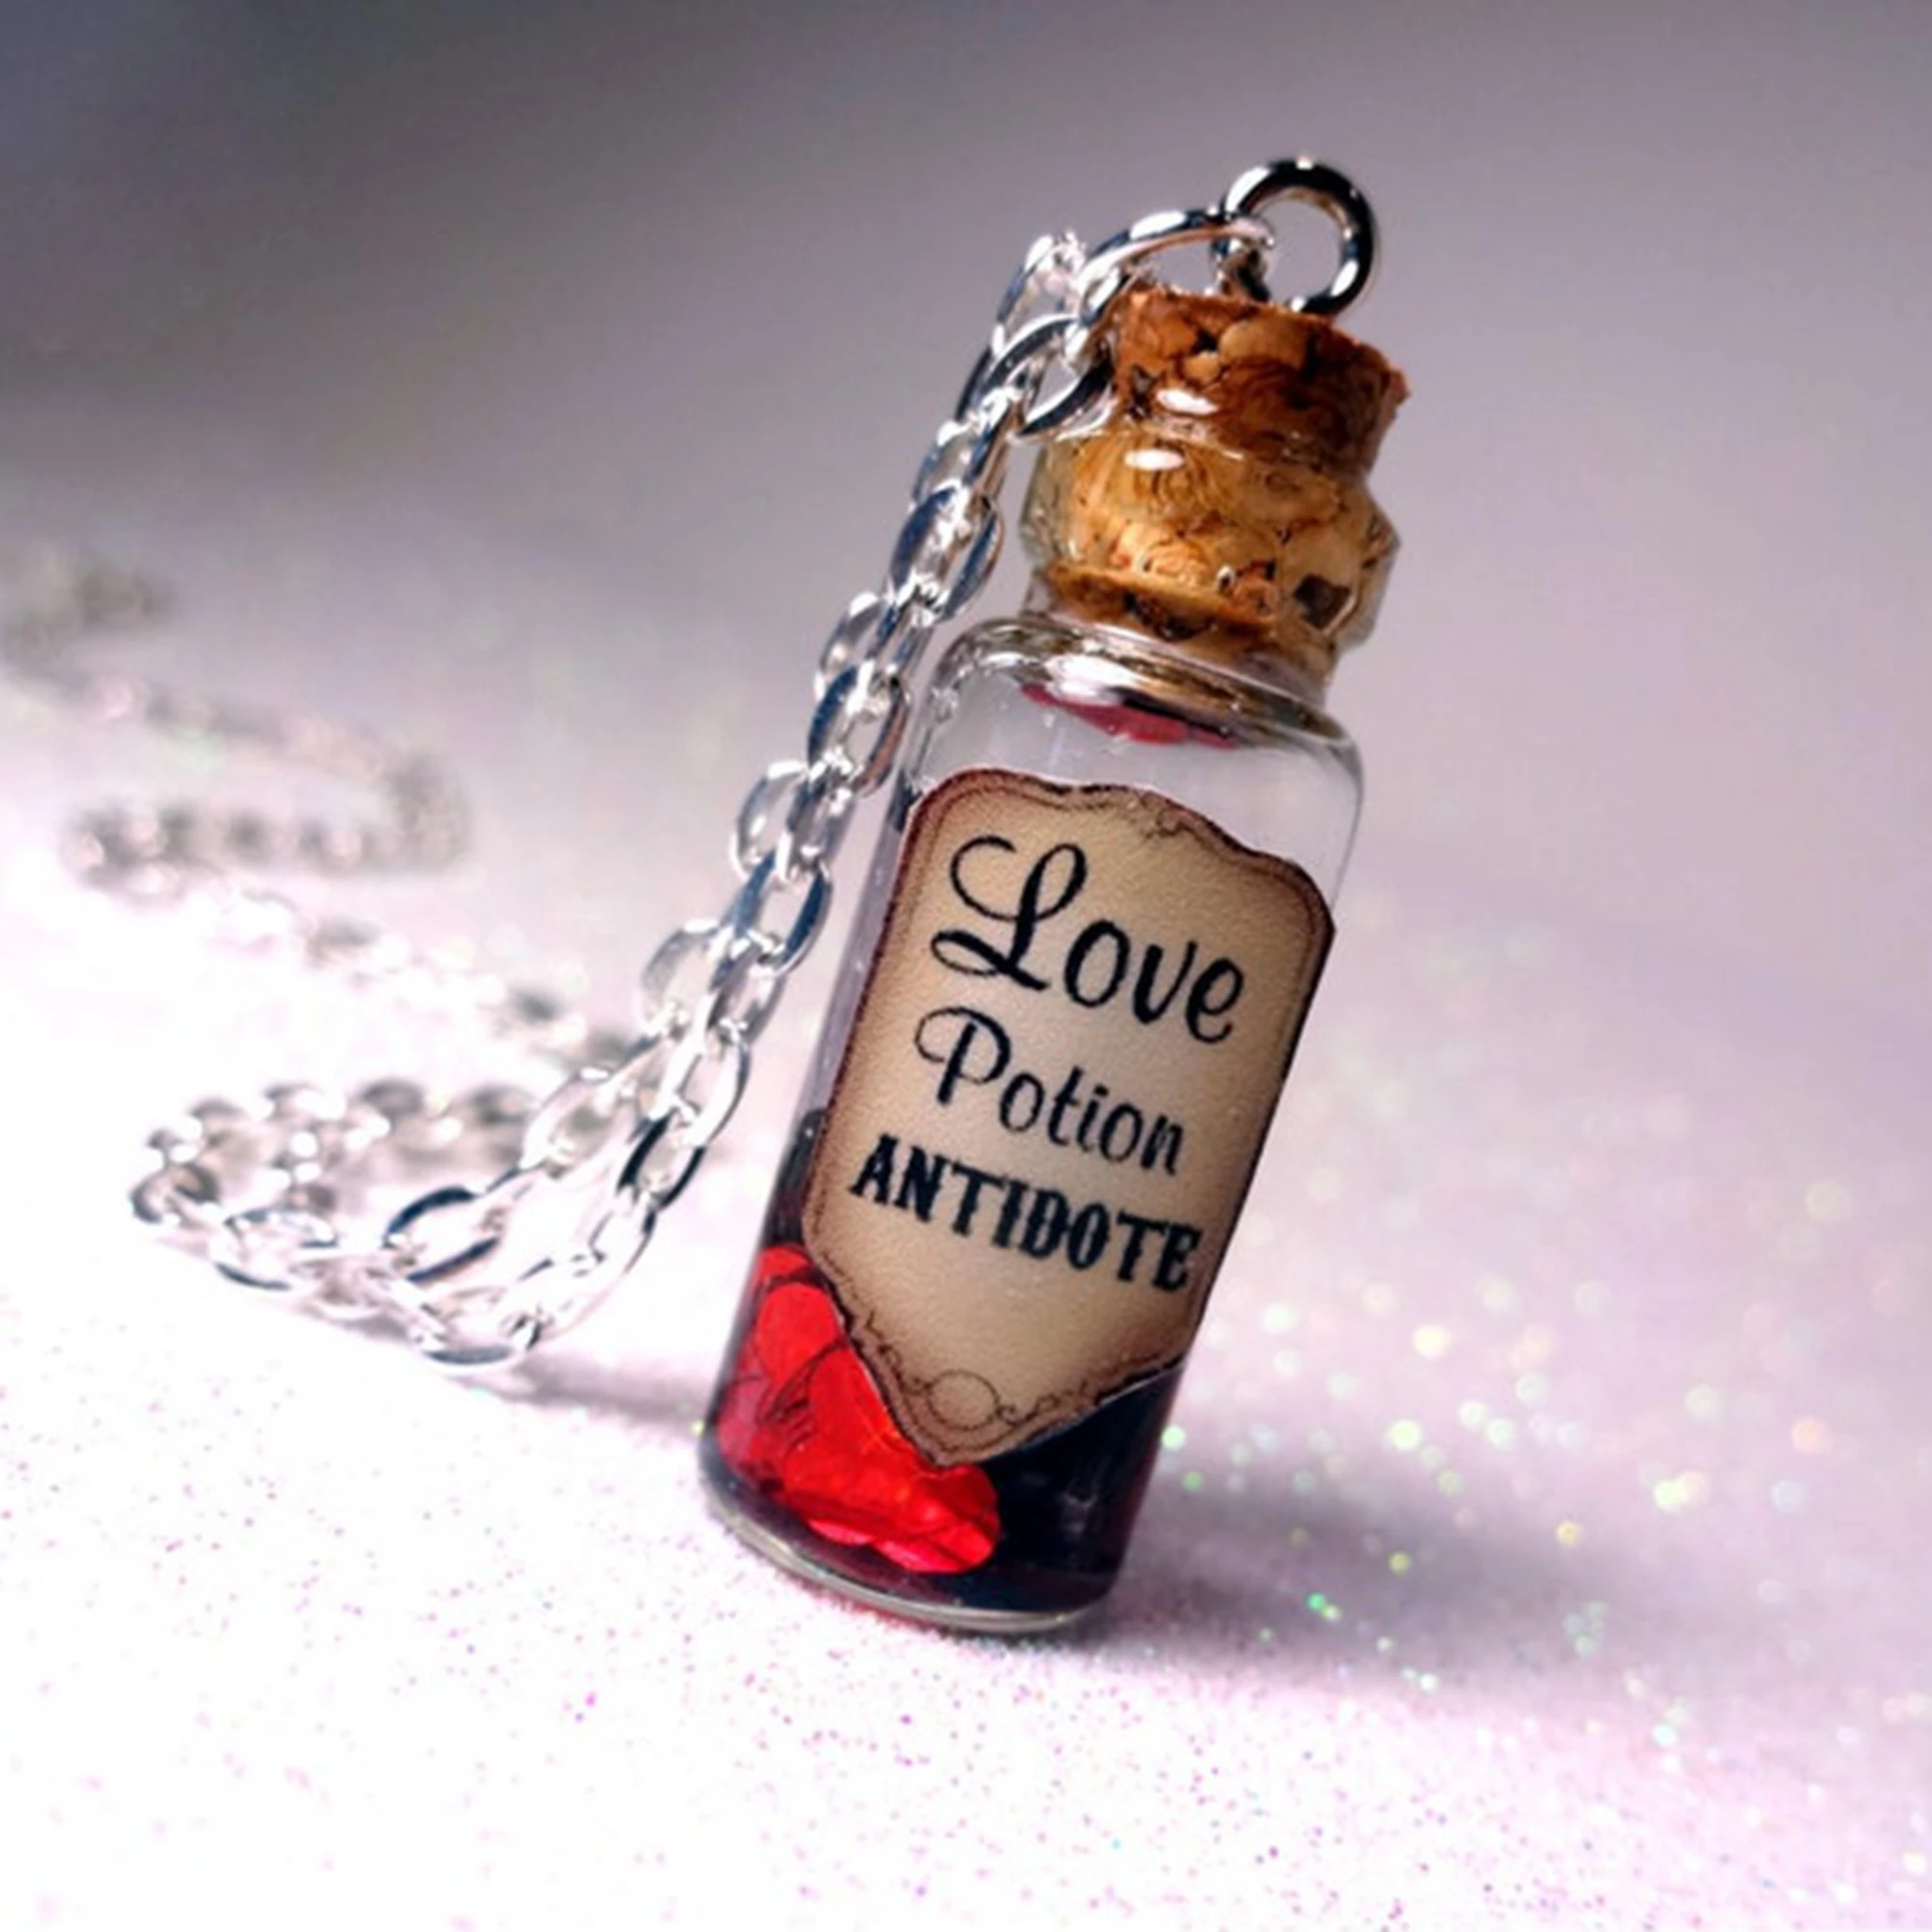 Love Potion Antidote Glass Bottle Cork Necklace Potion Vial Charm Liquid Shimmer Magic Spells